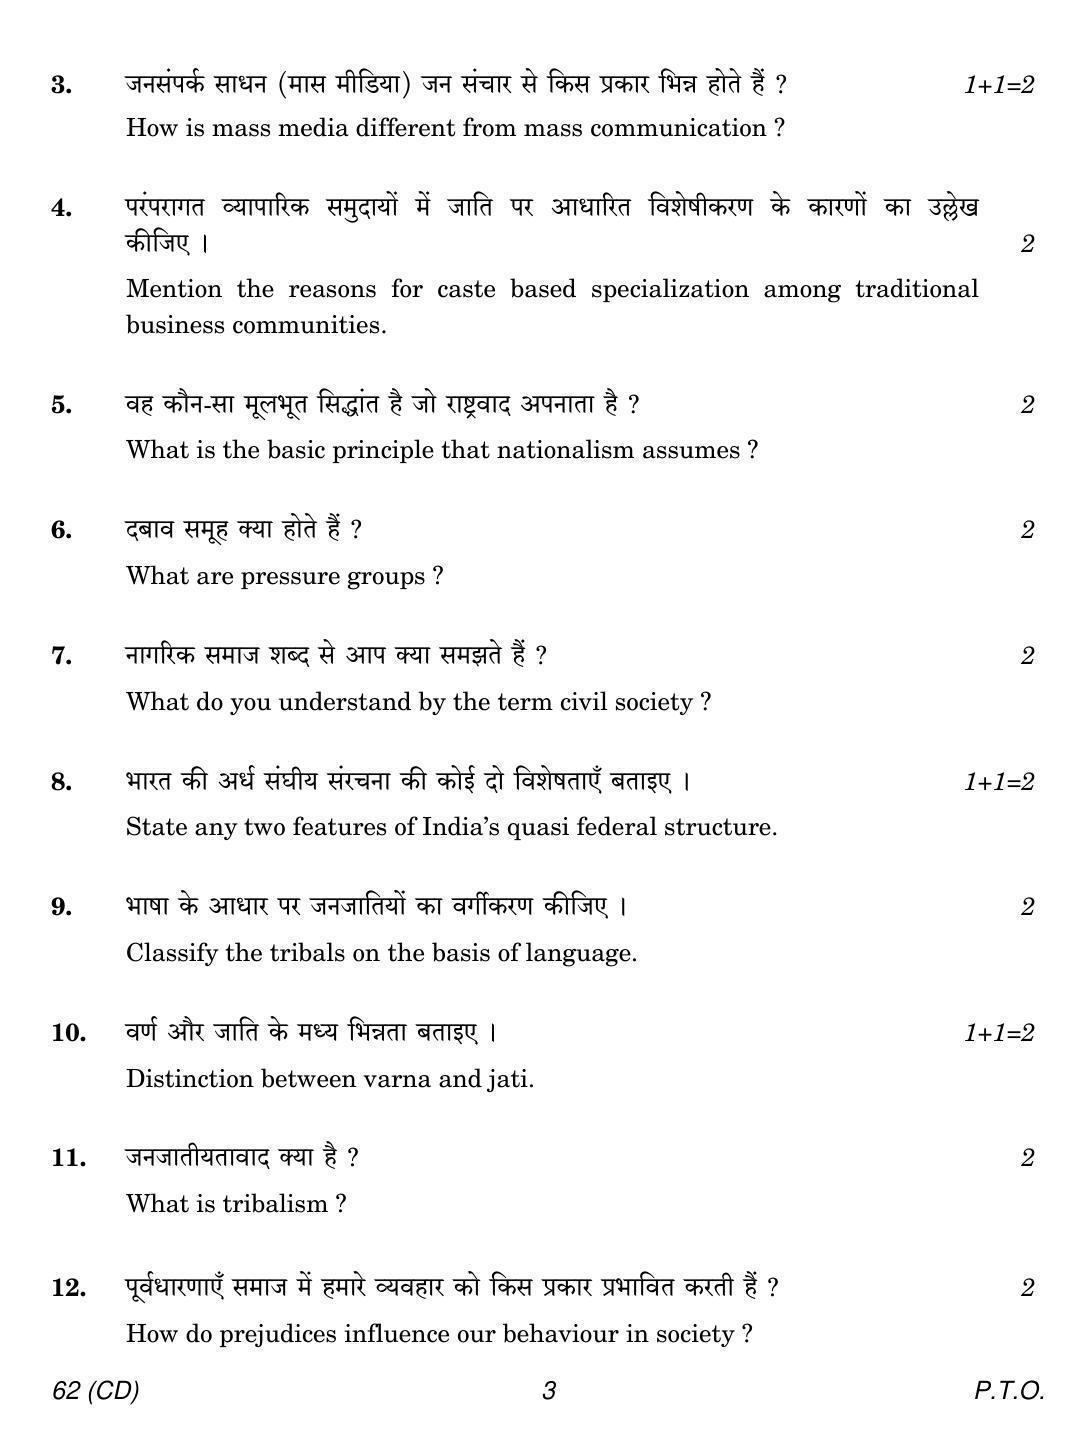 CBSE Class 12 62 SOCIOLOGY CD 2018 Question Paper - Page 3